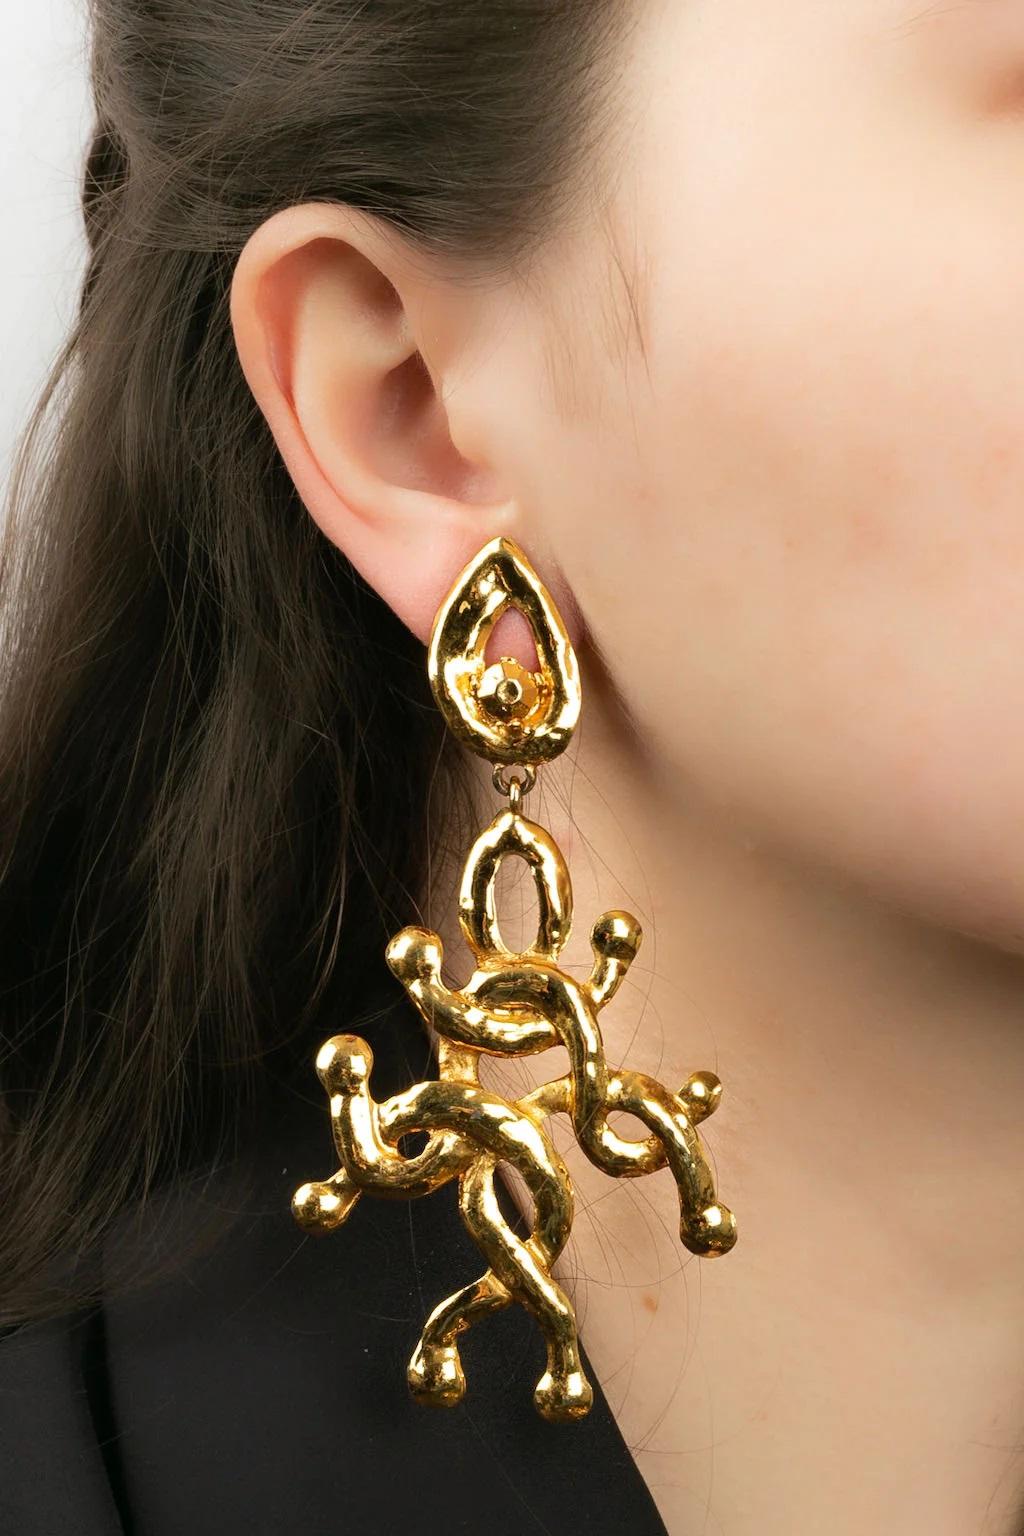 Christian Lacroix - (Made in France) Gold metal openwork earrings.

Additional information:
Dimensions: 5 cm x 10.5 H cm

Condition: 
Very good condition

Seller Ref number: BO1